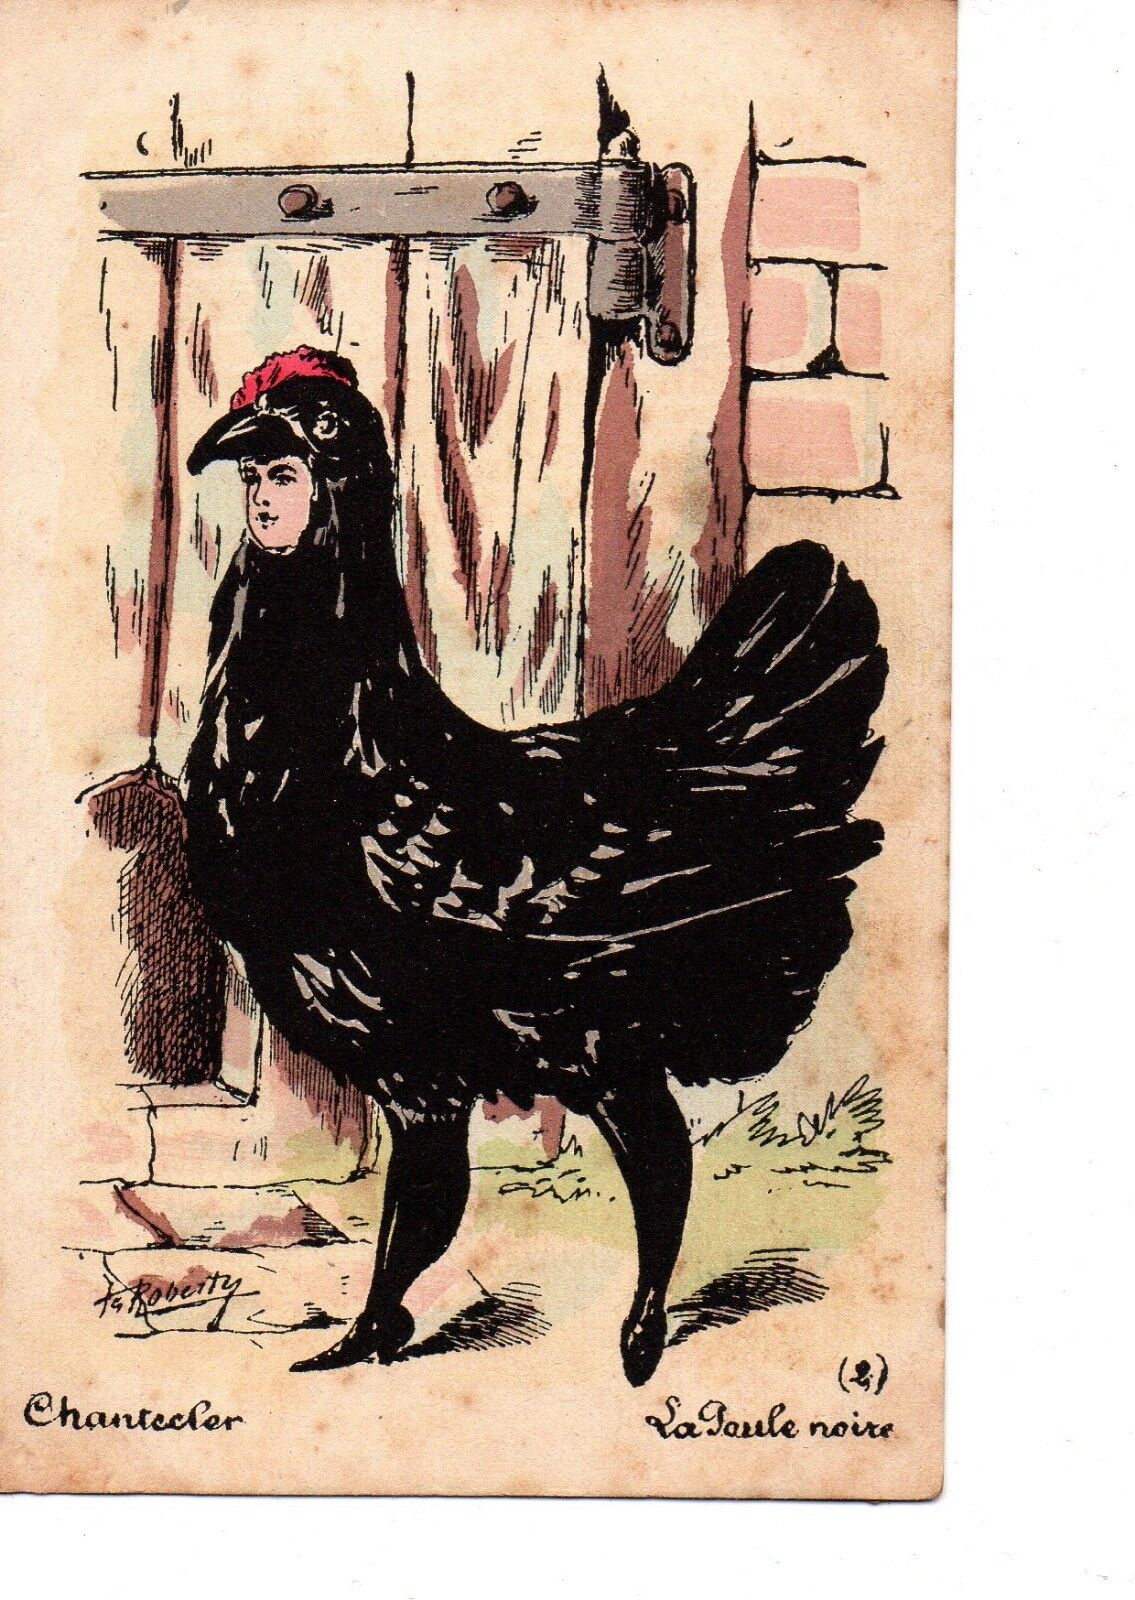 Cpa Chantecler d Edmond Rostand illustration Roberty The Black Chicken